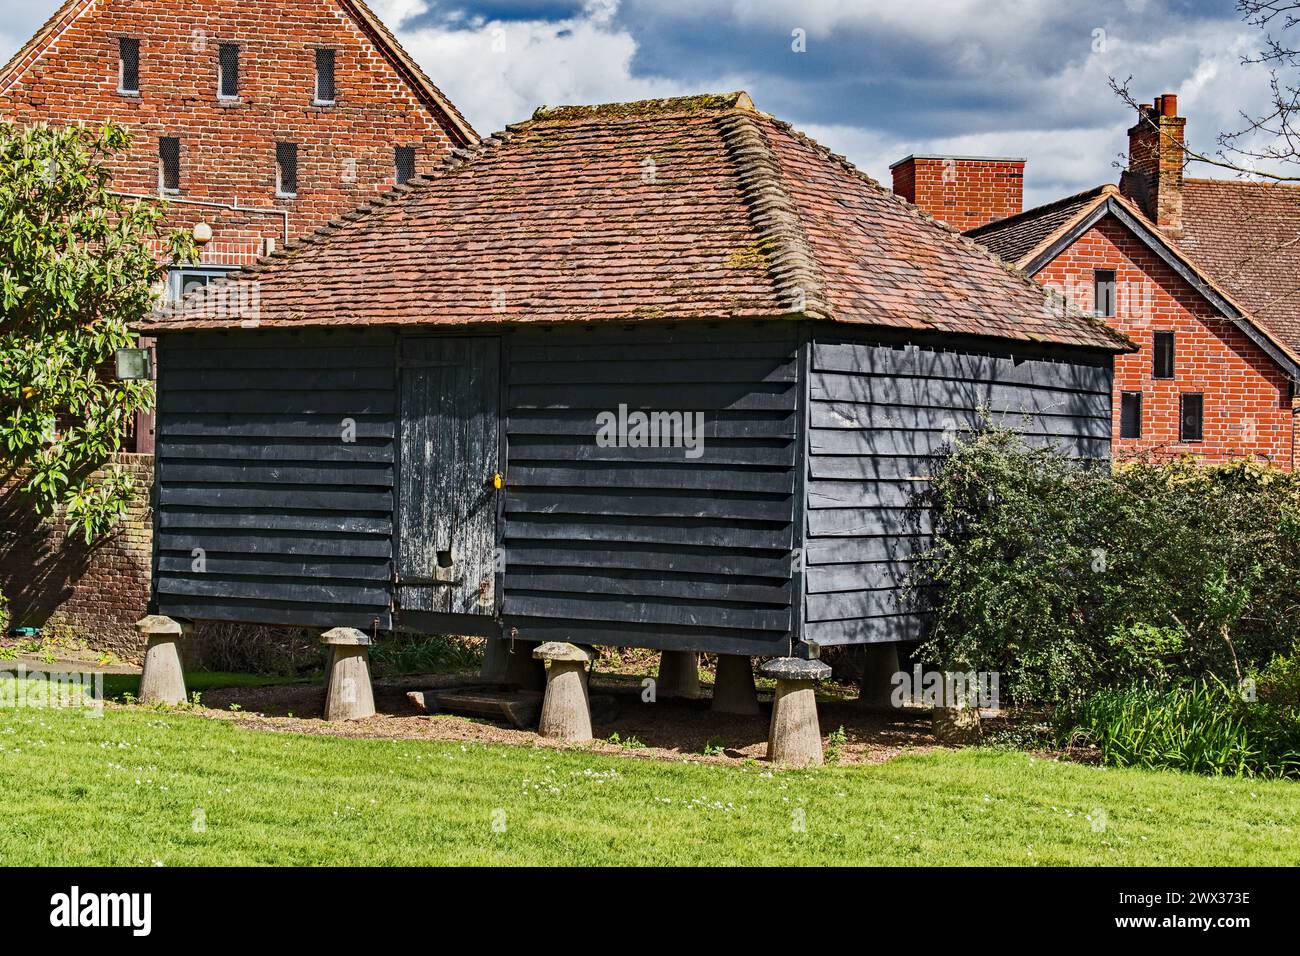 Typical granary storage mounted on Staddlestones. Hall Place, Bexley. Stock Photo